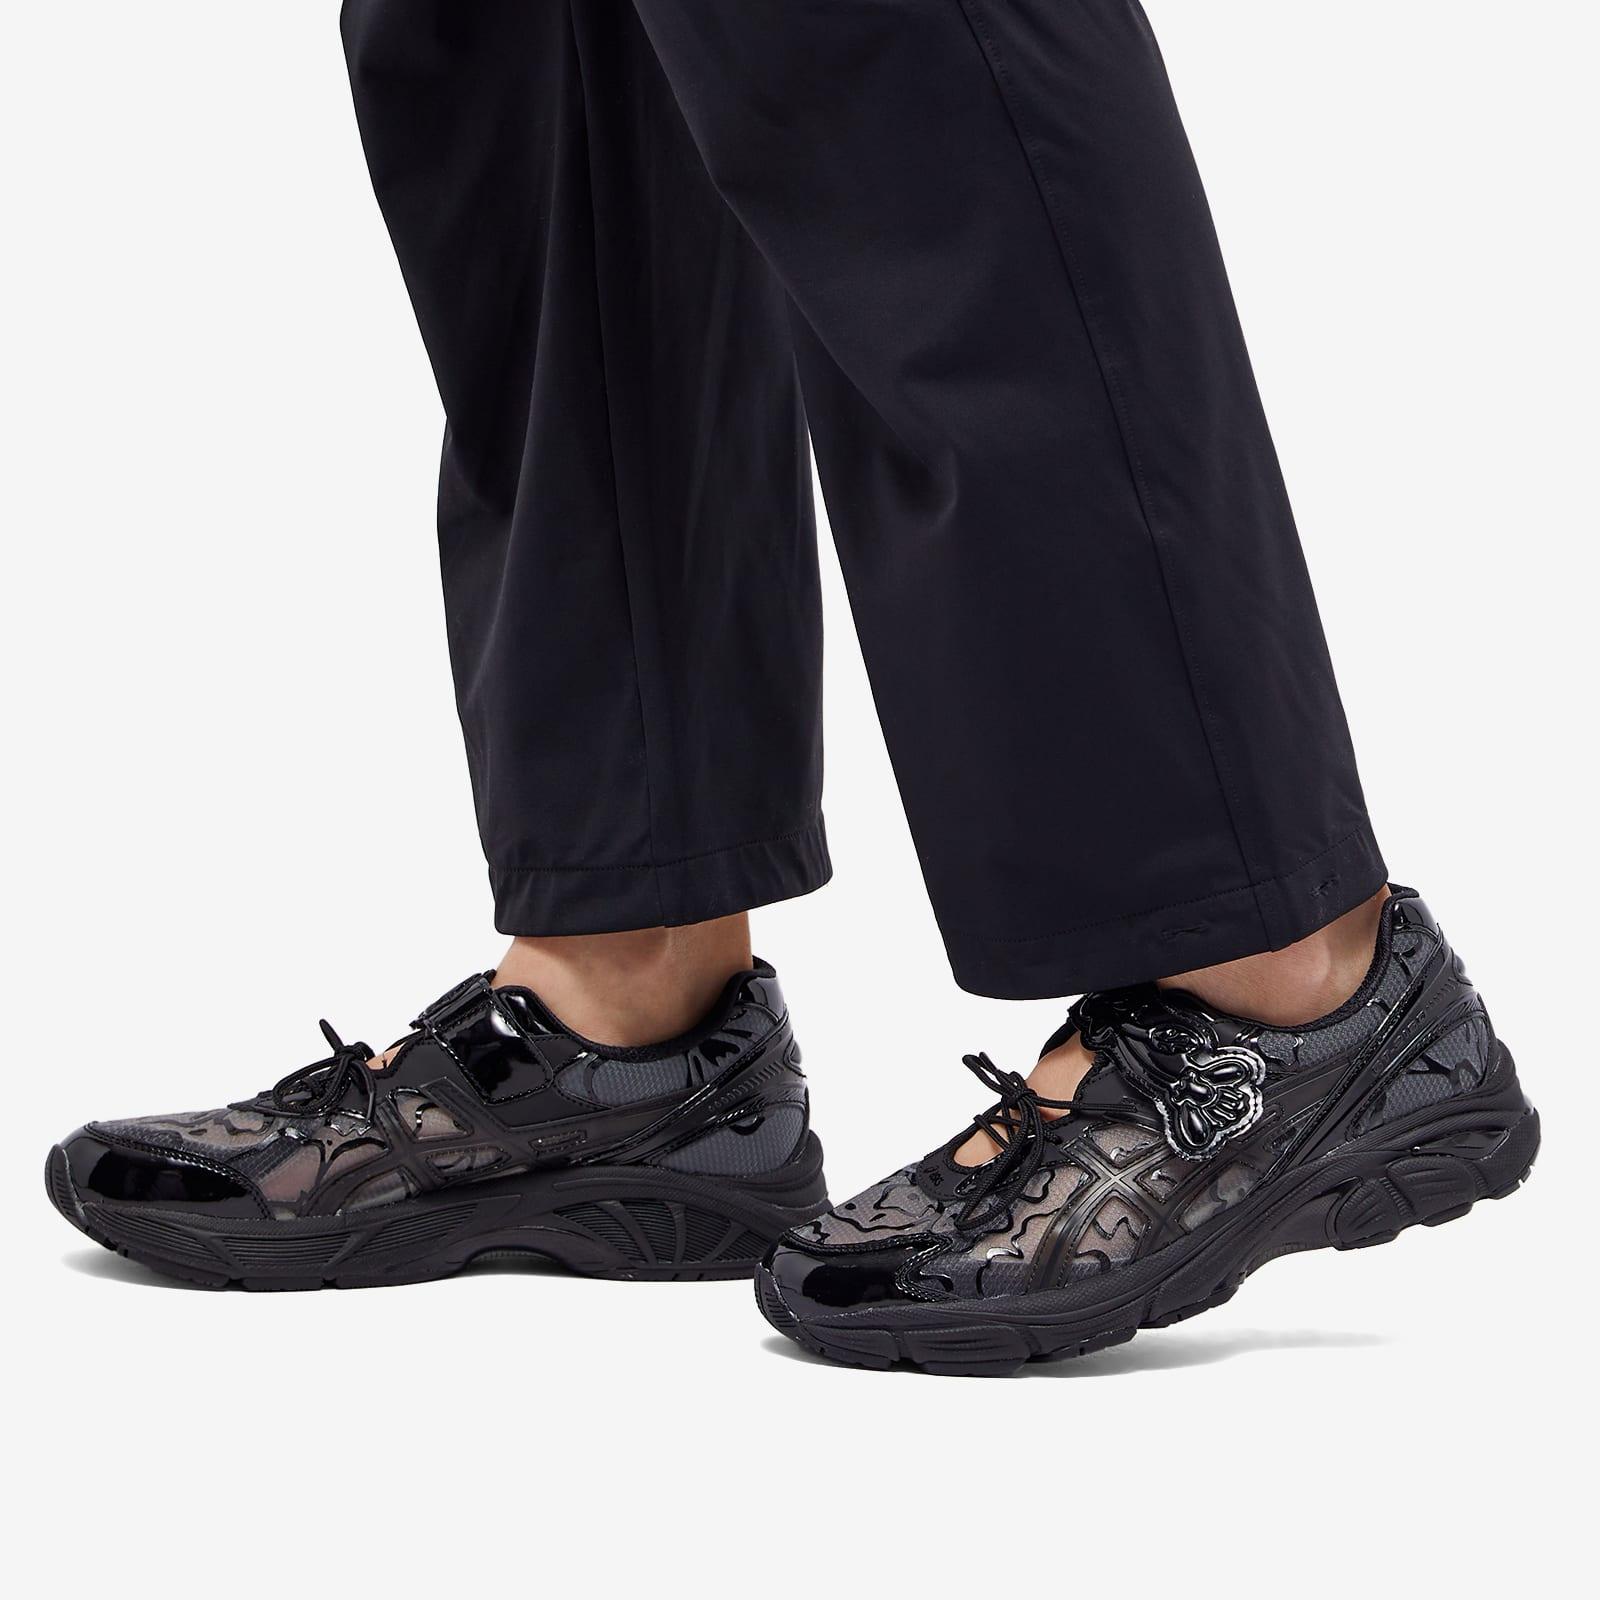 Asics X Cecilie Bahnsen Gt-2160 Sneakers in Black | Lyst